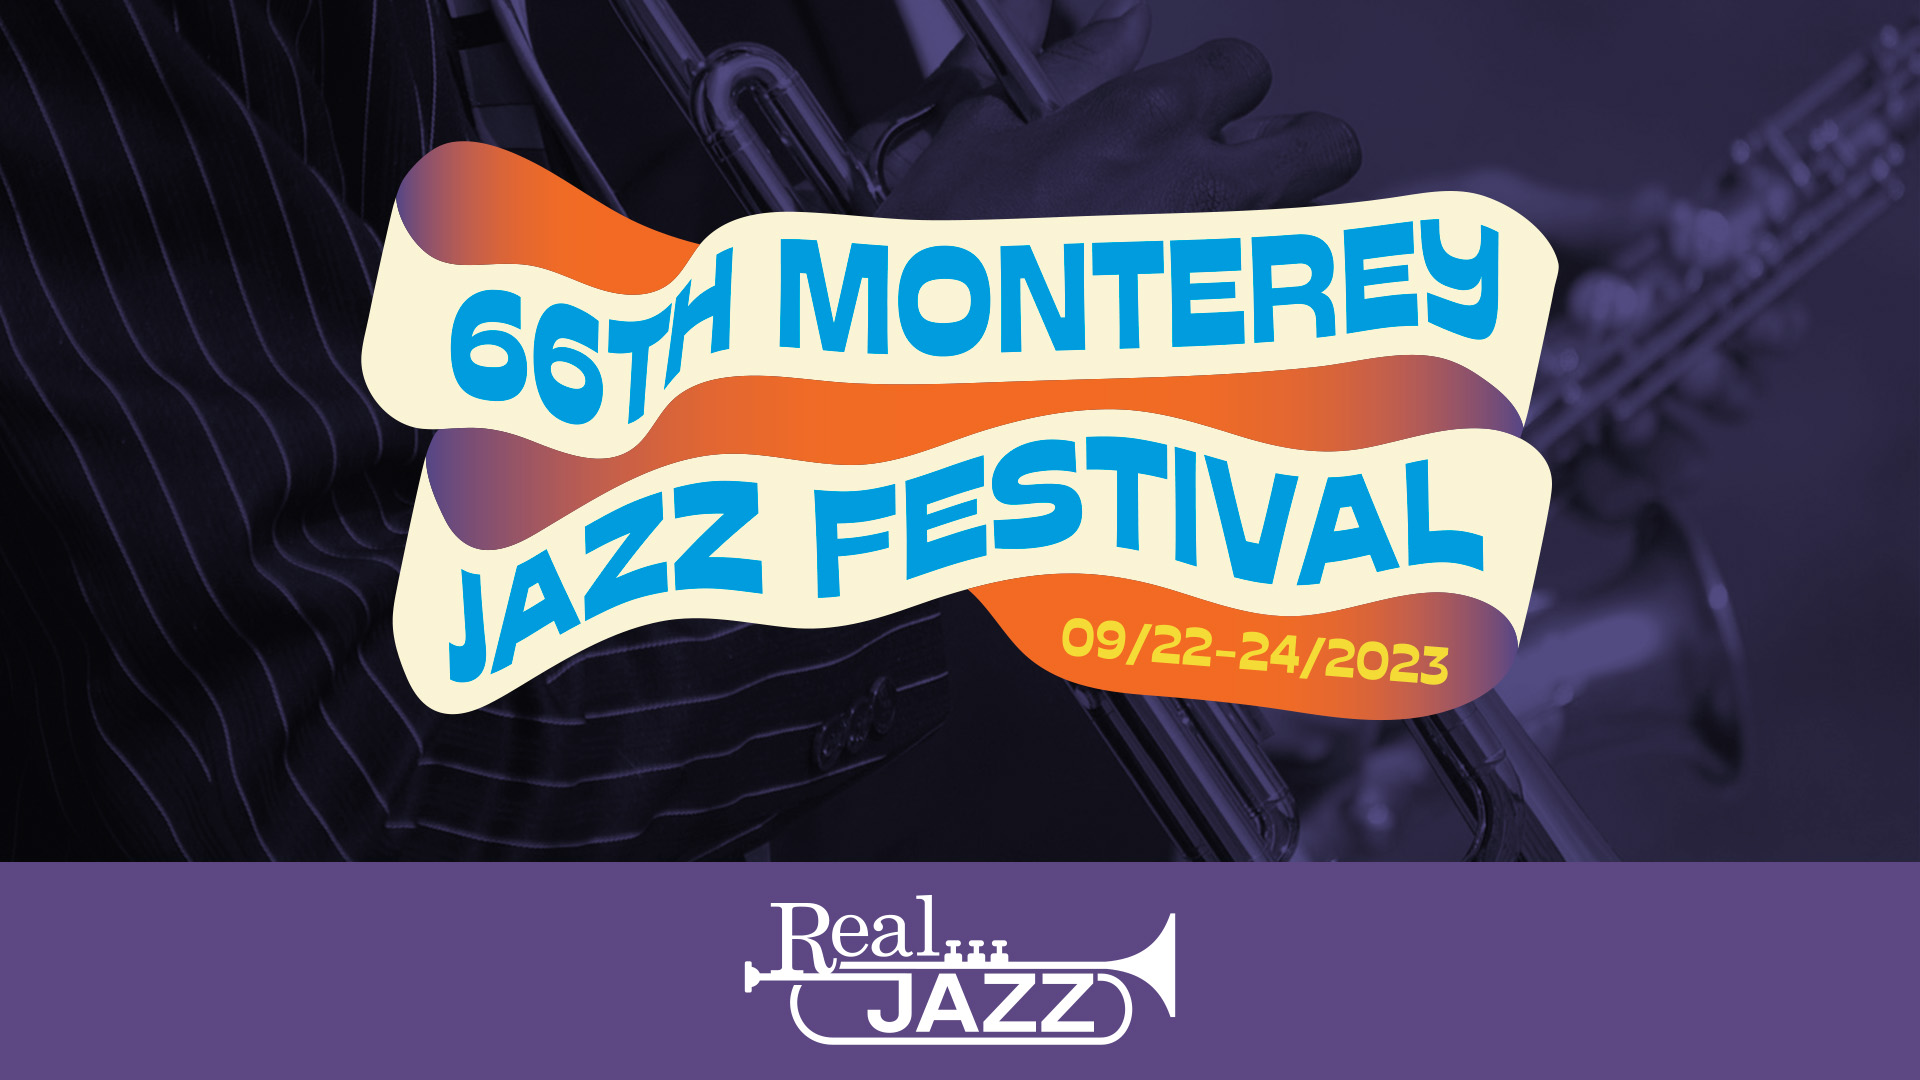 Listen to the 66th Monterey Jazz Festival on SiriusXM's Real Jazz channel